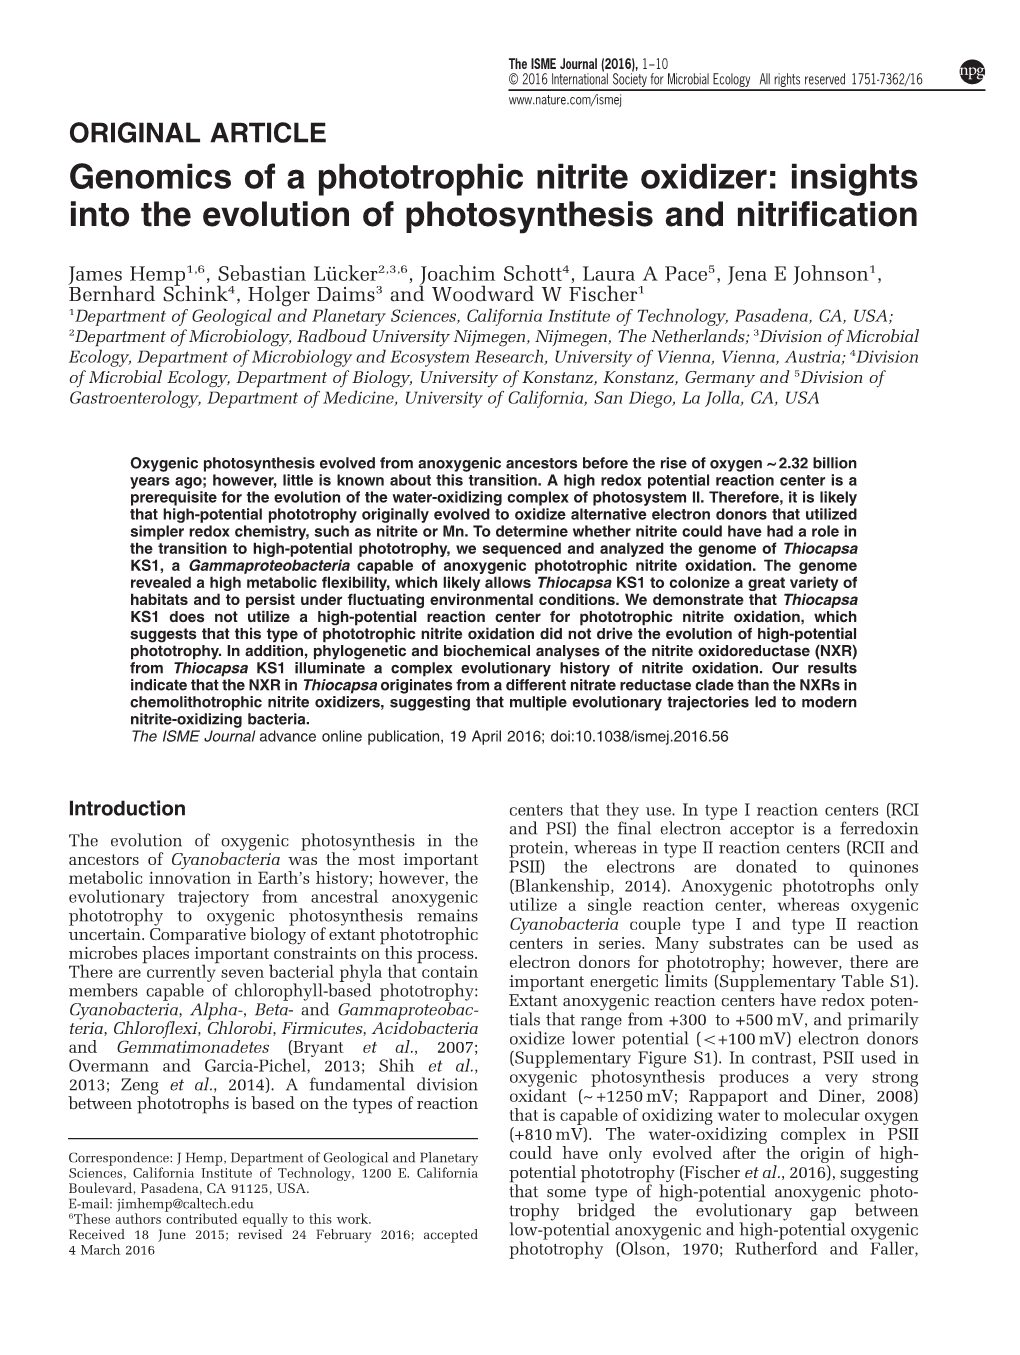 Genomics of a Phototrophic Nitrite Oxidizer: Insights Into the Evolution of Photosynthesis and Nitrification